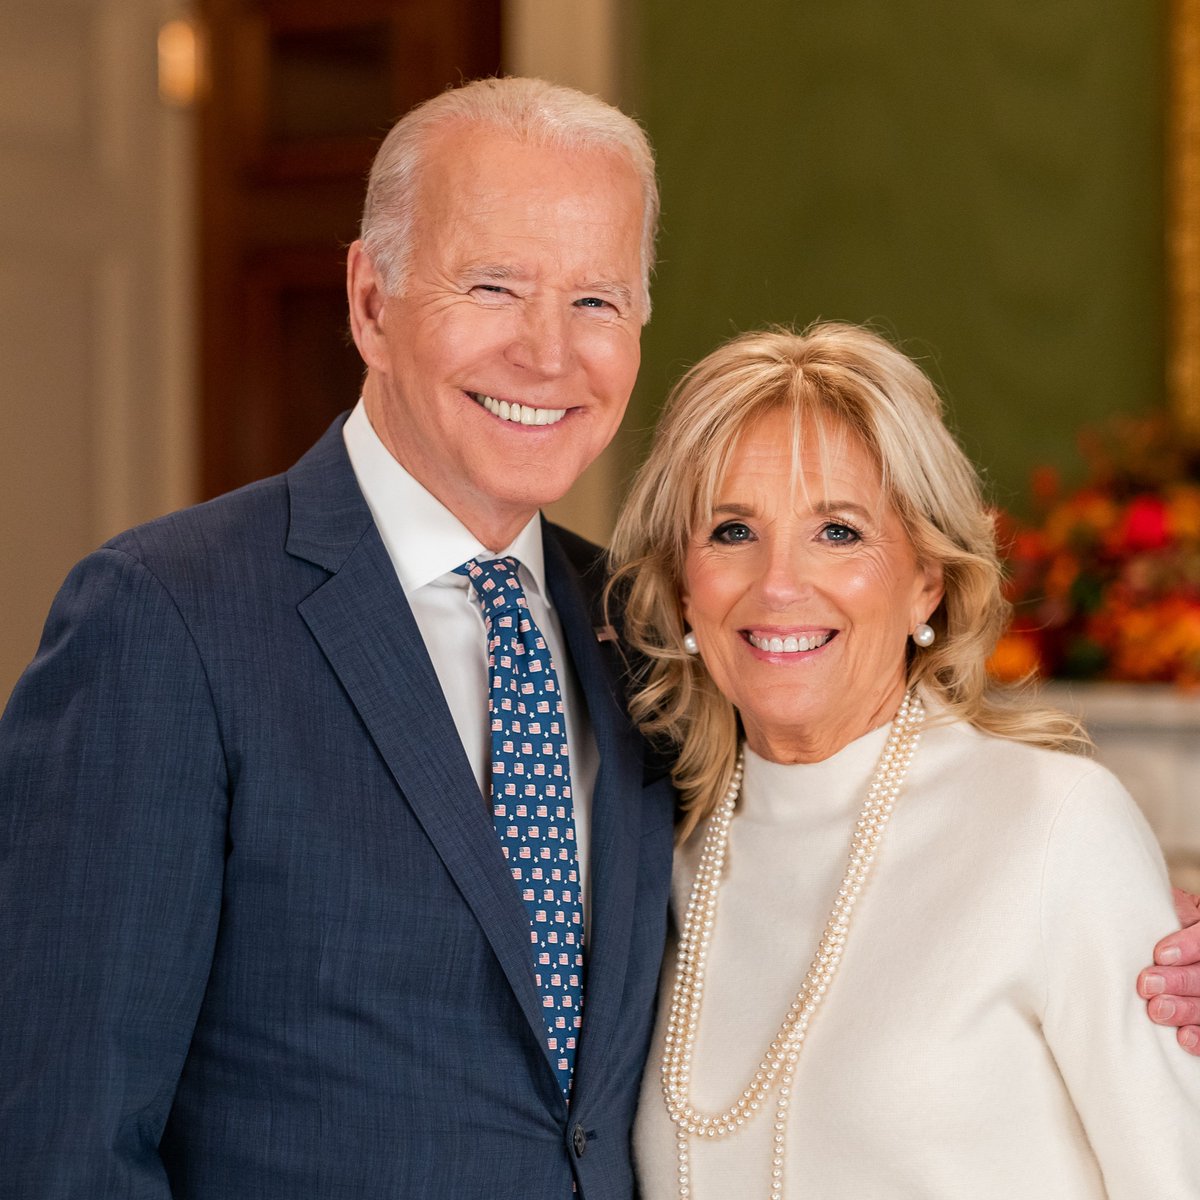 Teaching isn’t just what @DrBiden does; it’s who she is. On Teacher Appreciation Day, I’m honoring Jill and all of our nation’s educators for their selflessness and dedication to inspiring the next generation of leaders.